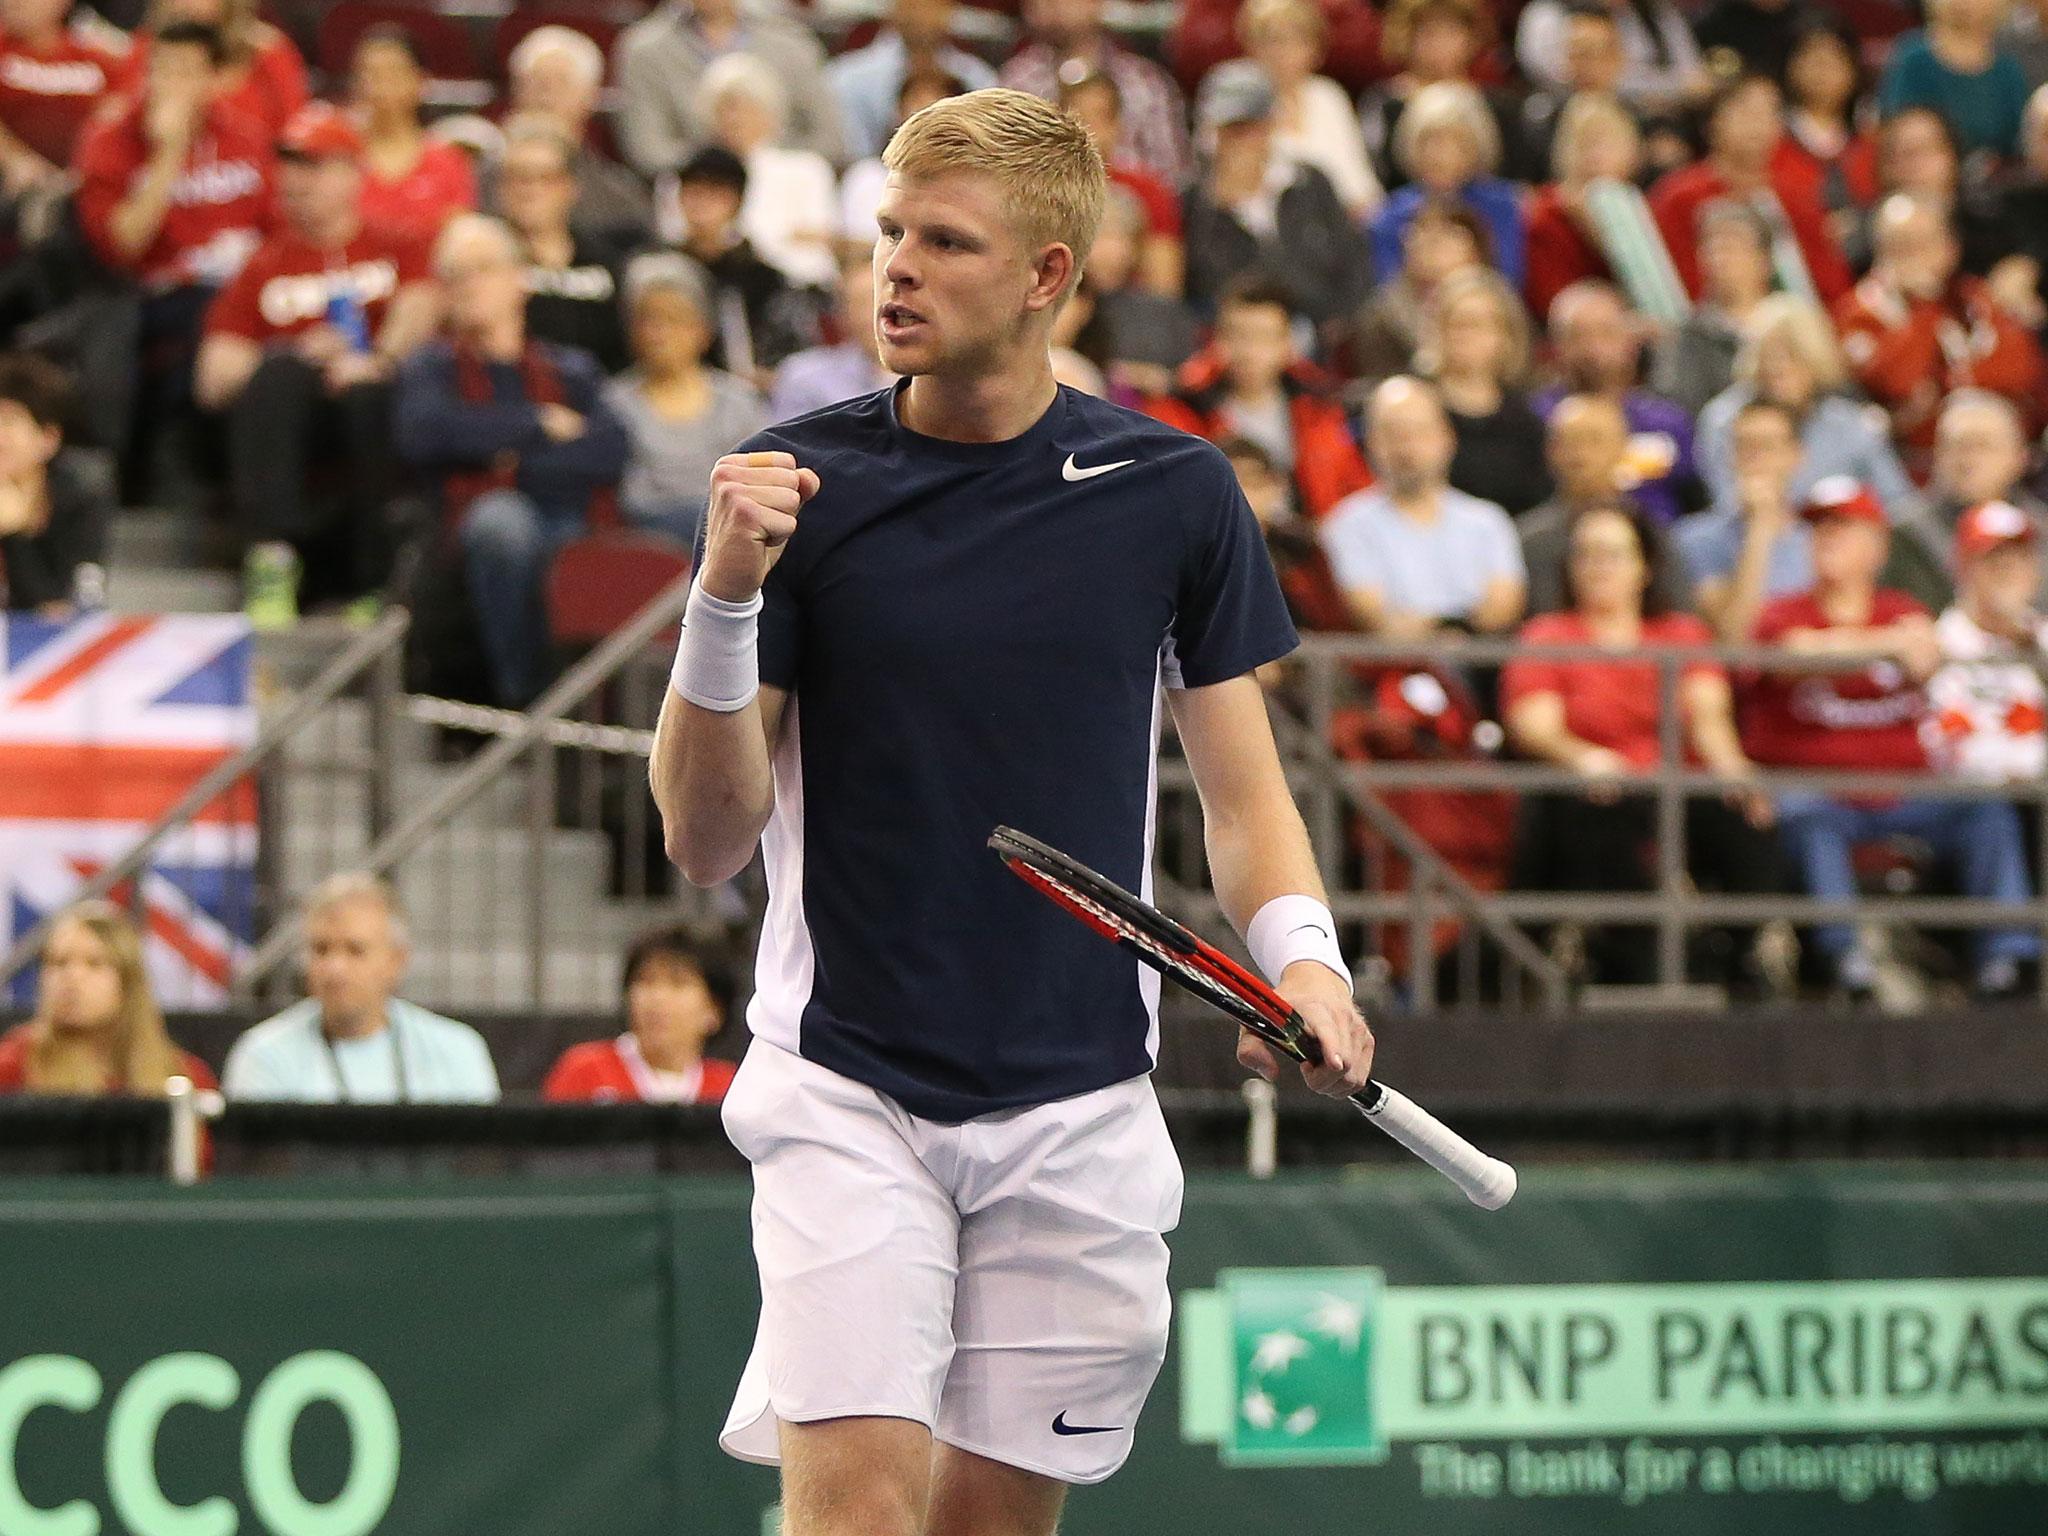 Kyle Edmund will take on Milos Raonic in the quarter-finals of the Delray Beach Open